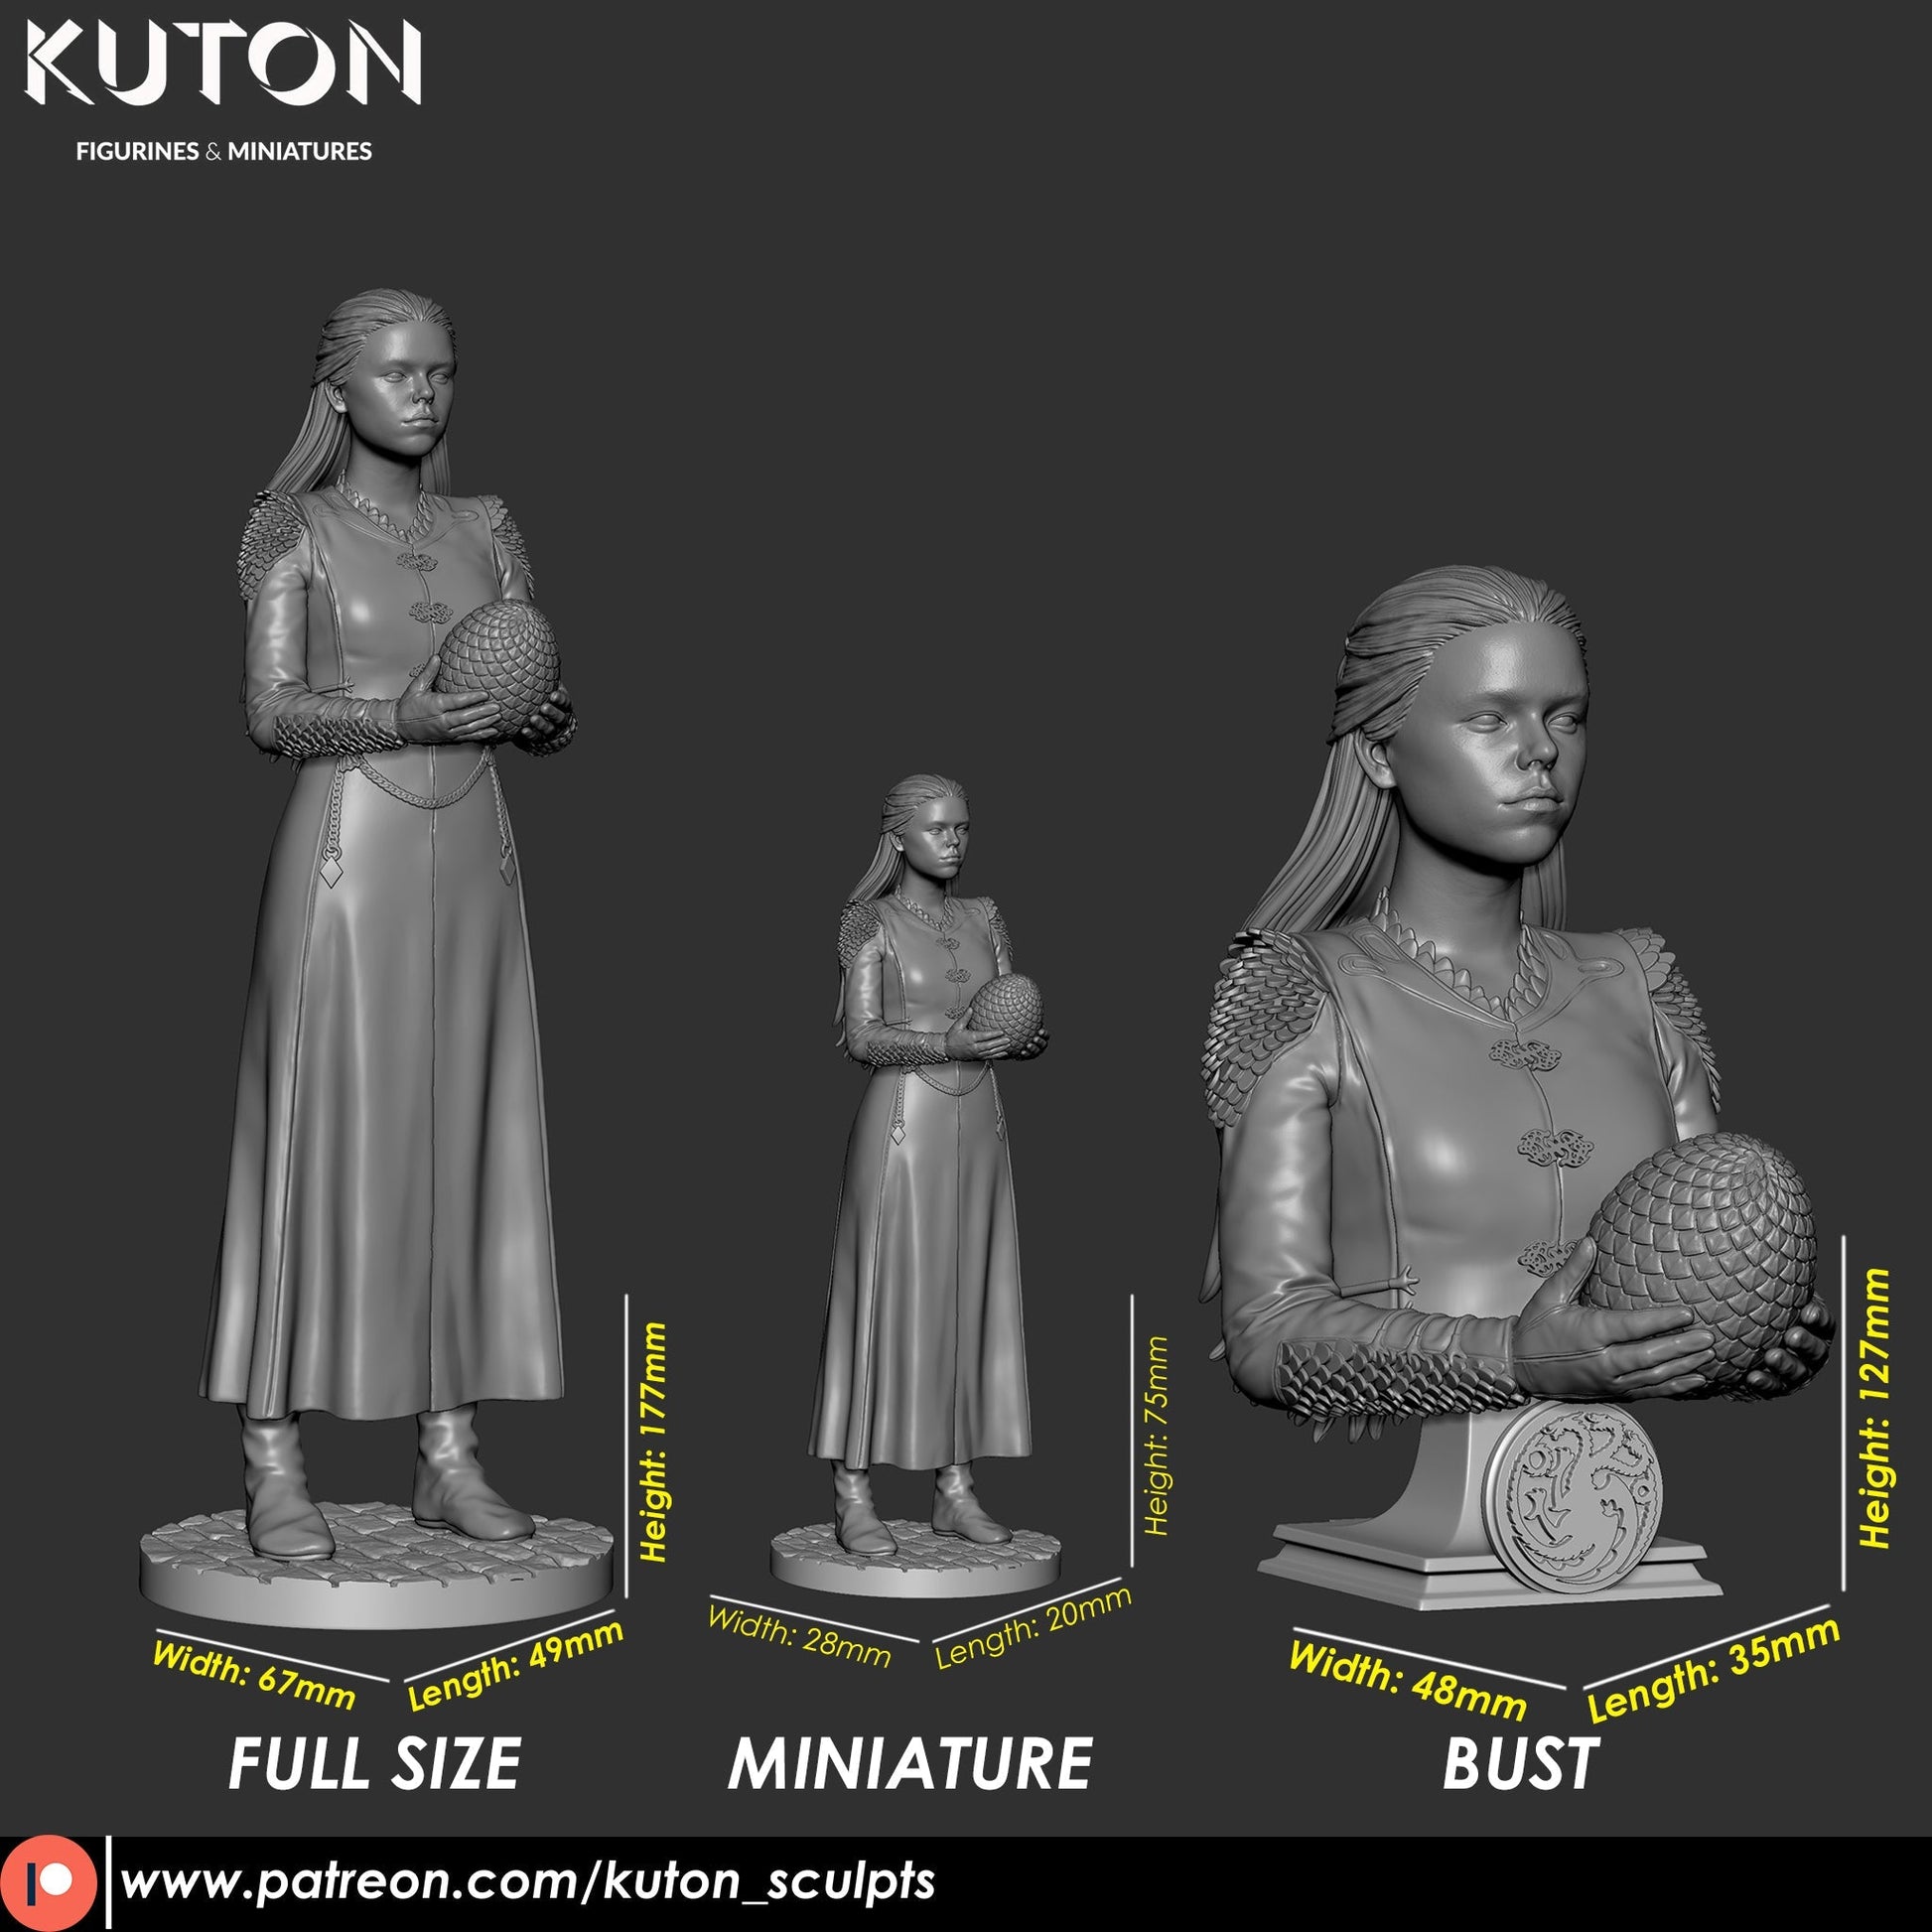 Rhaenyra DIORAMA 3d printed Resin Figure Model Kit miniatures figurines collectibles and scale models UNPAINTED Fun Art by KUTON FIGURINES